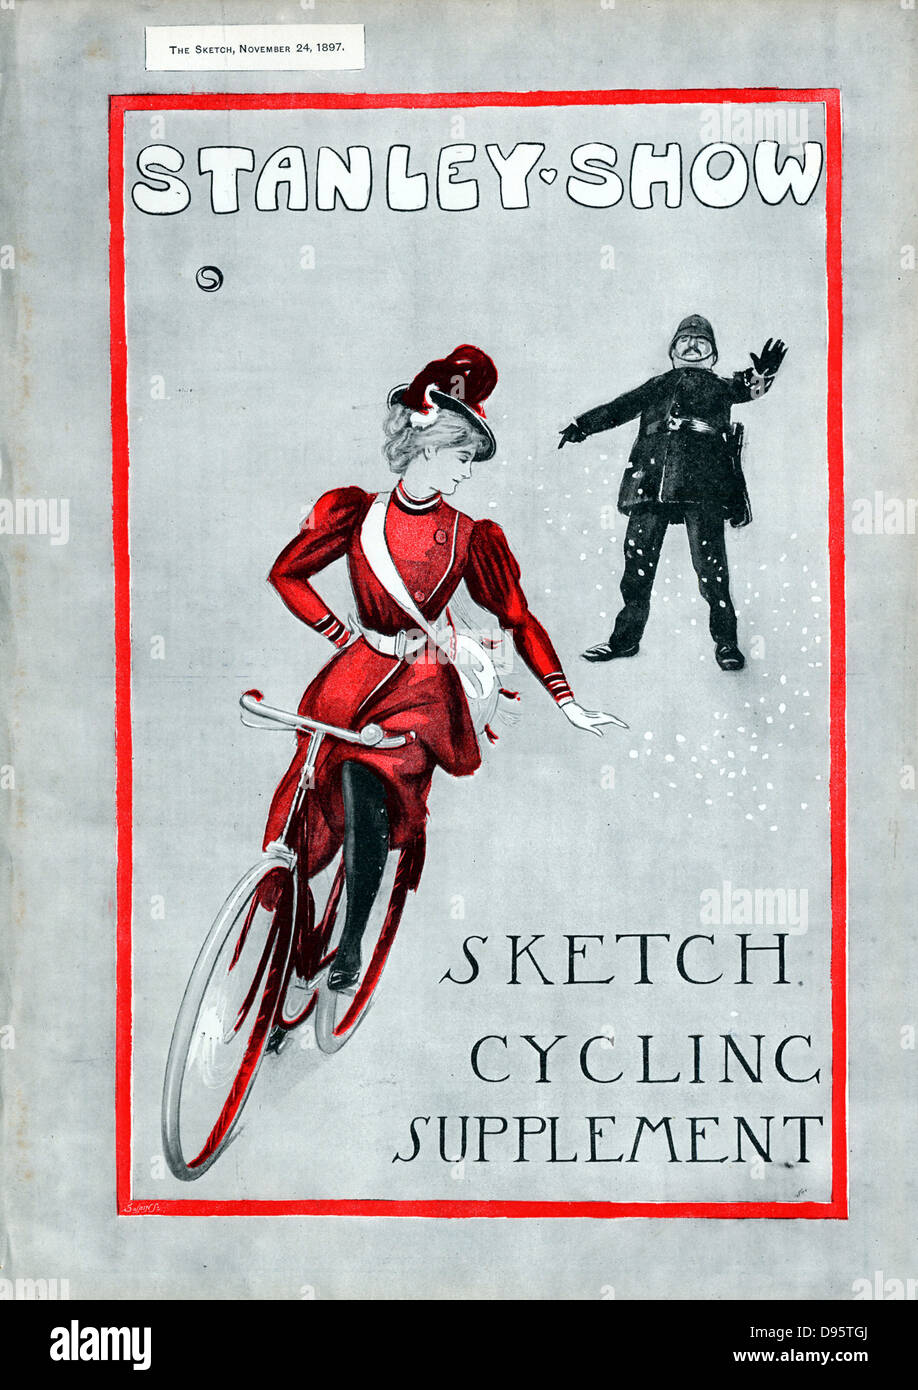 Cycling: Lady in 'Rational' cycling dress. Cover of 'The Sketch Cycling Supplement' London 14 November 1897 celebrating 21 years of the Stanley Cycling Club. Stock Photo